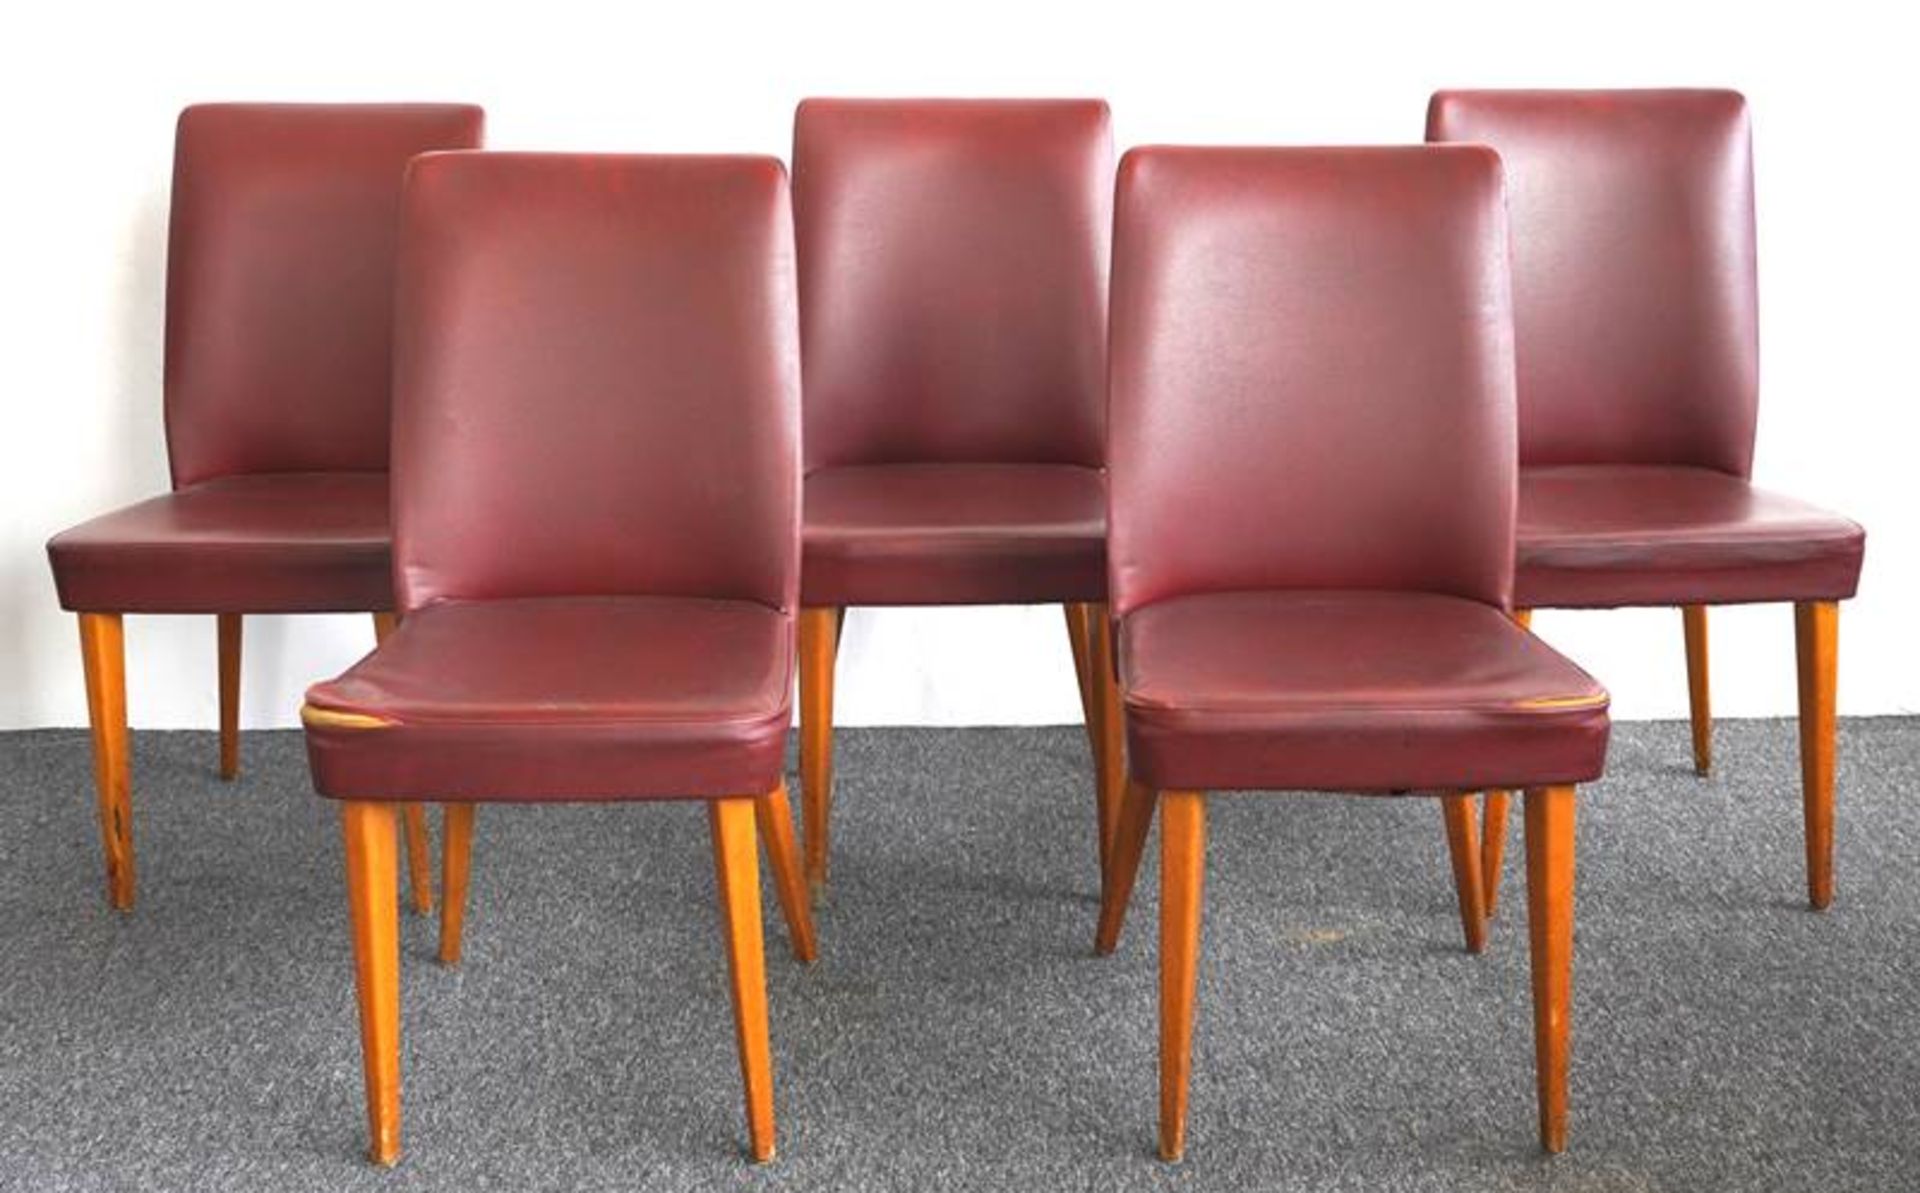 Five design dining chairs